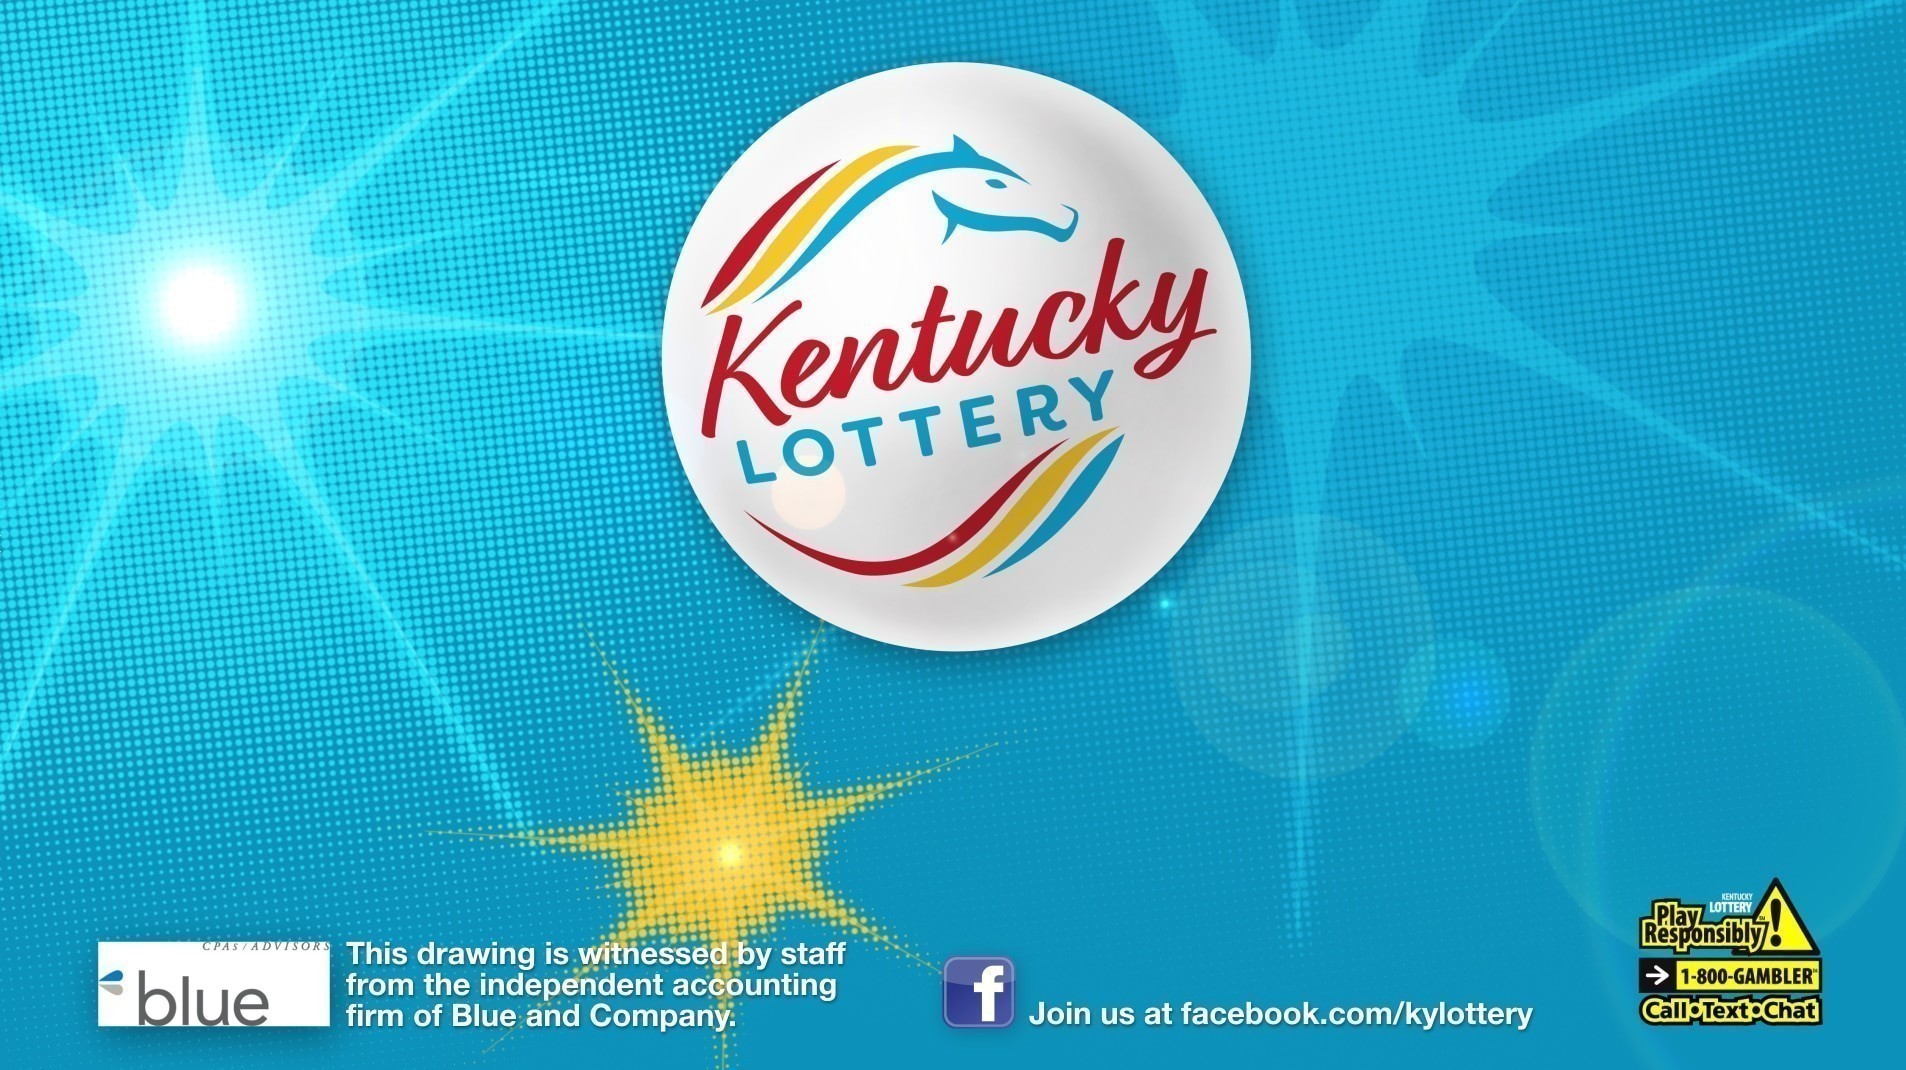 Kentucky Lottery Online Review 2022 Games, Promotions & App